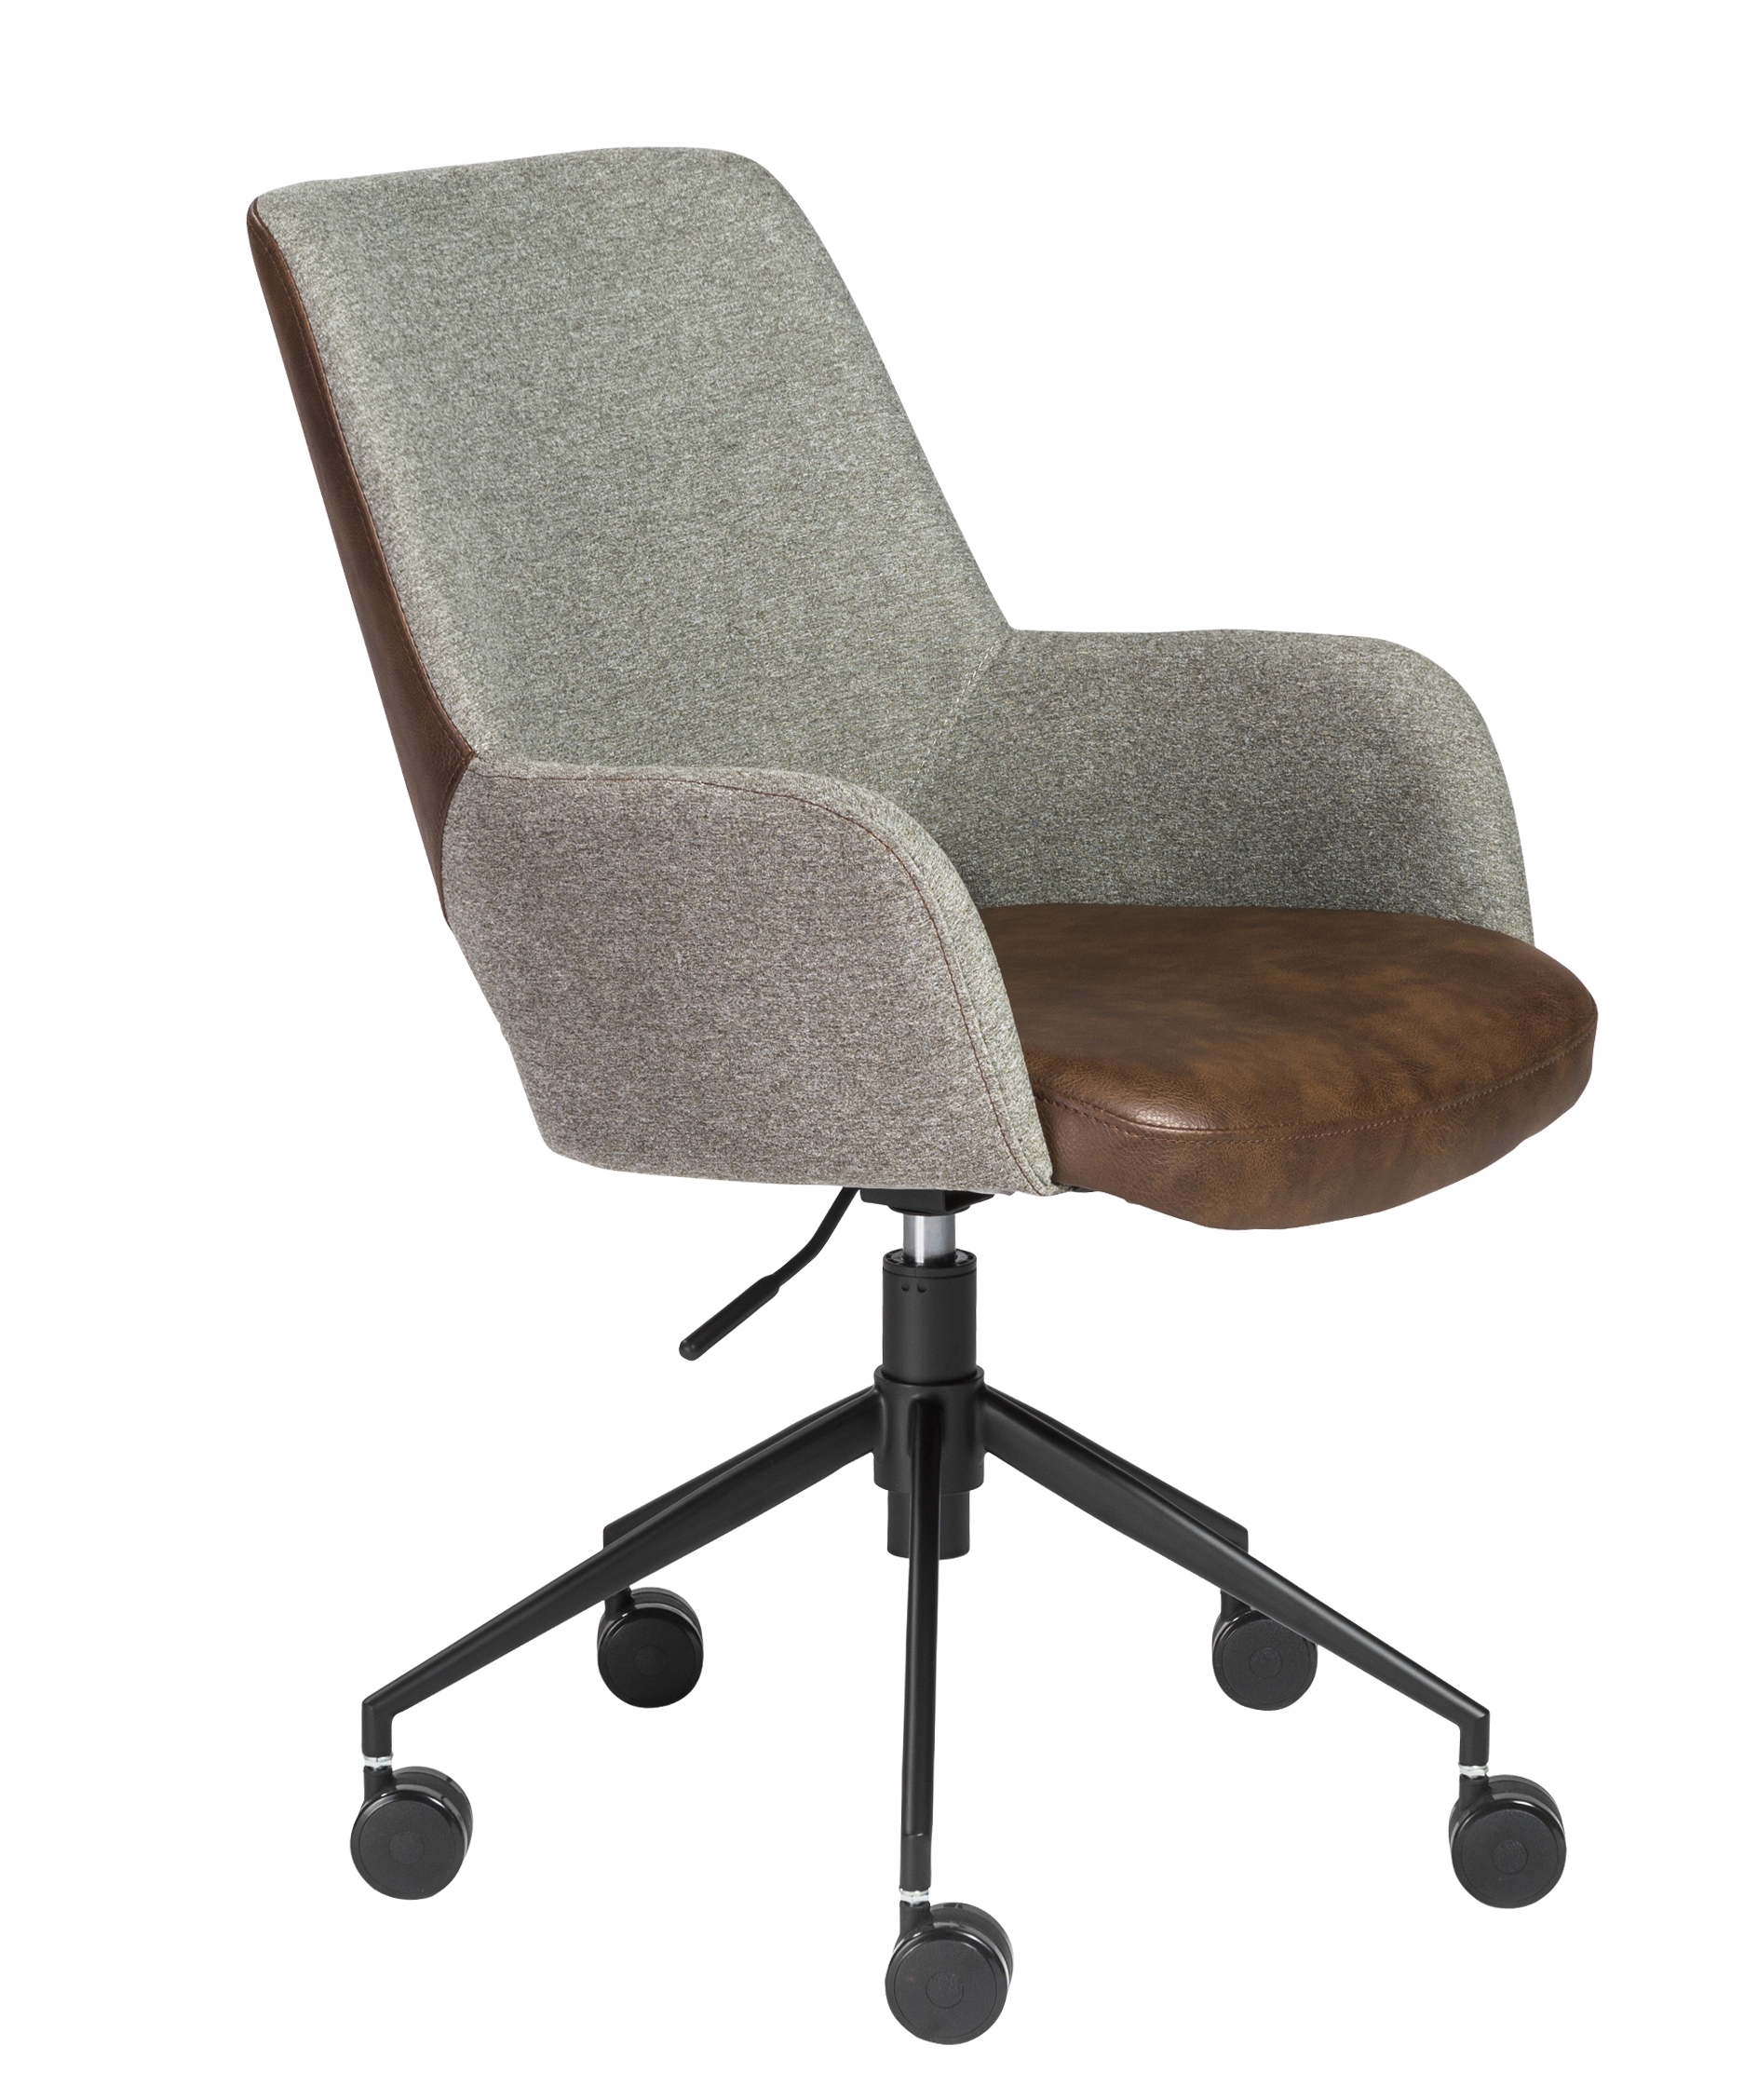 Randy Office Chair - Image 1